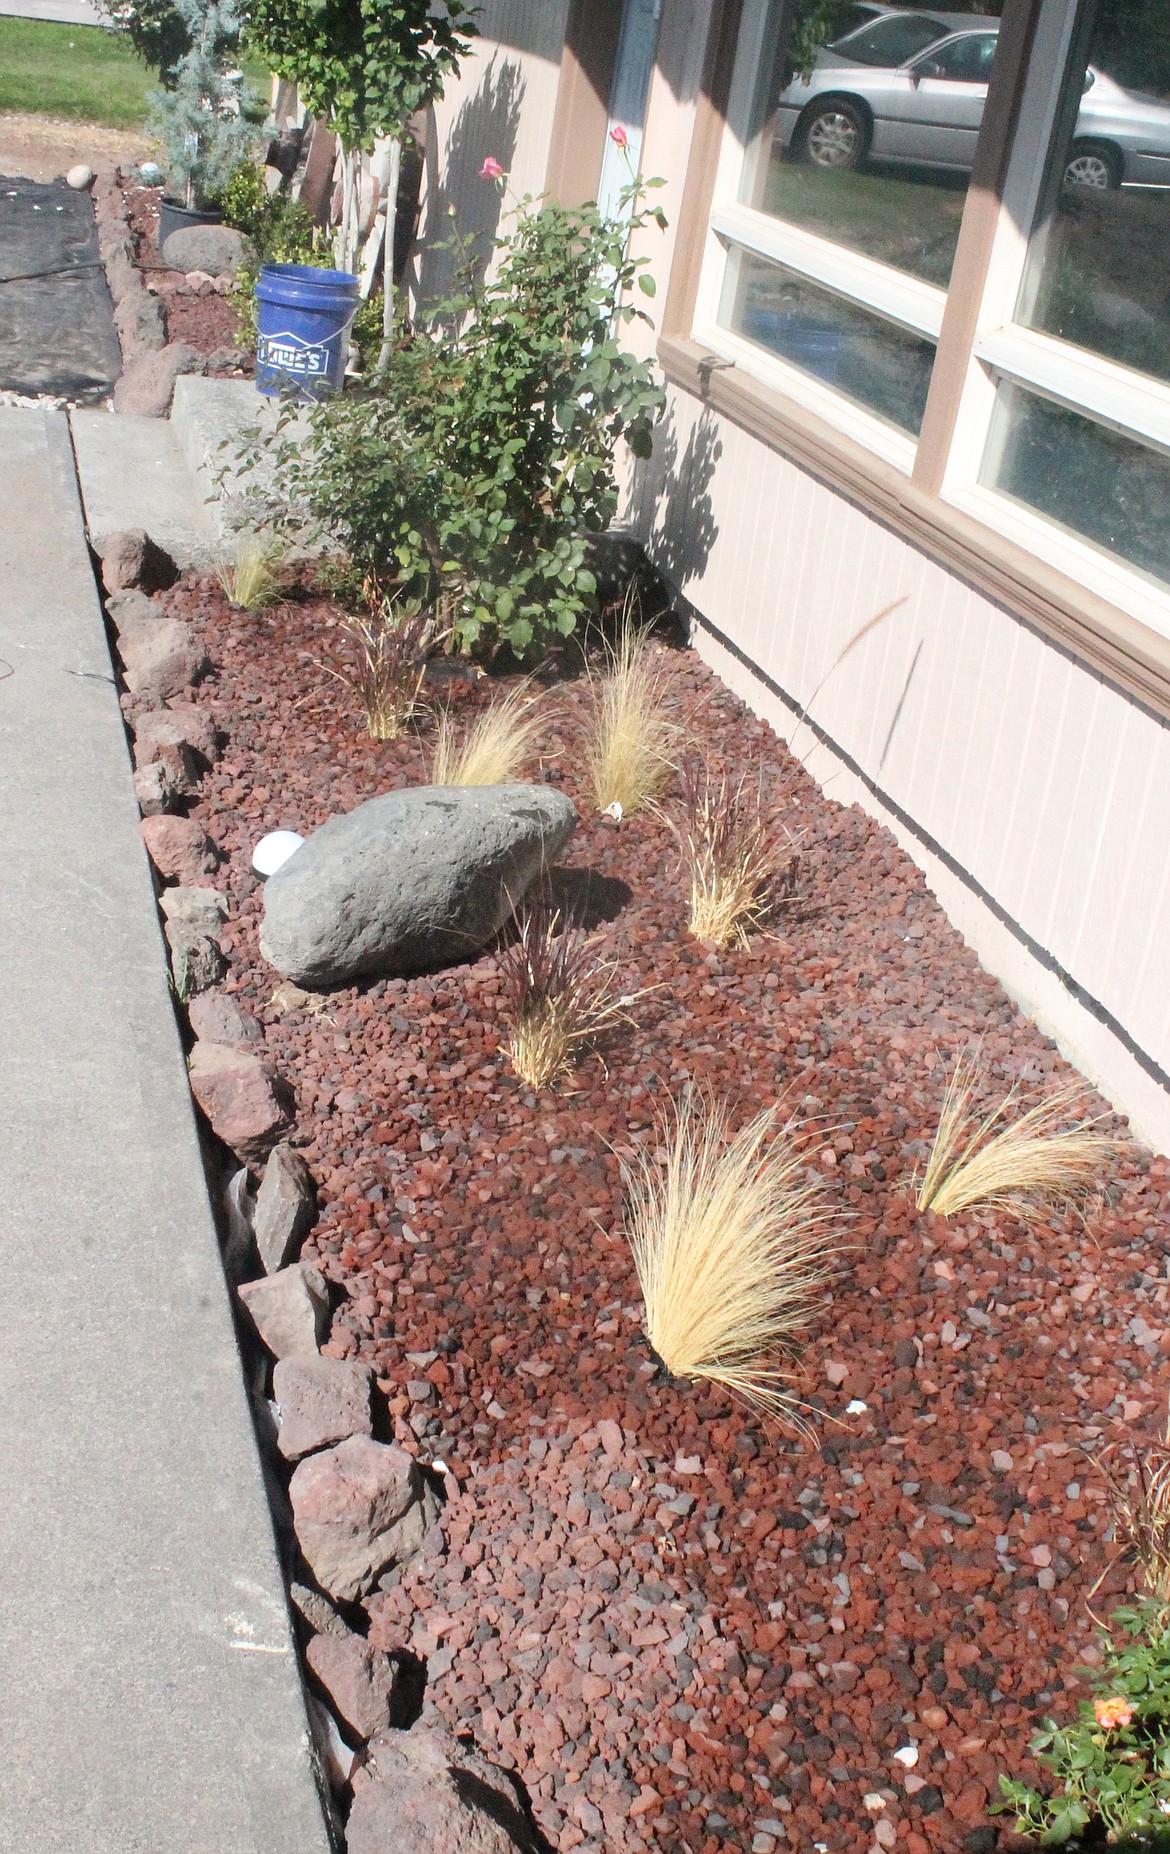 Where there might otherwise be a conventional flower bed up against the house, Teresa Fields has put in lava rock with a few drought-resistant plants. Those can be watered with a drip hose once a week, she said.